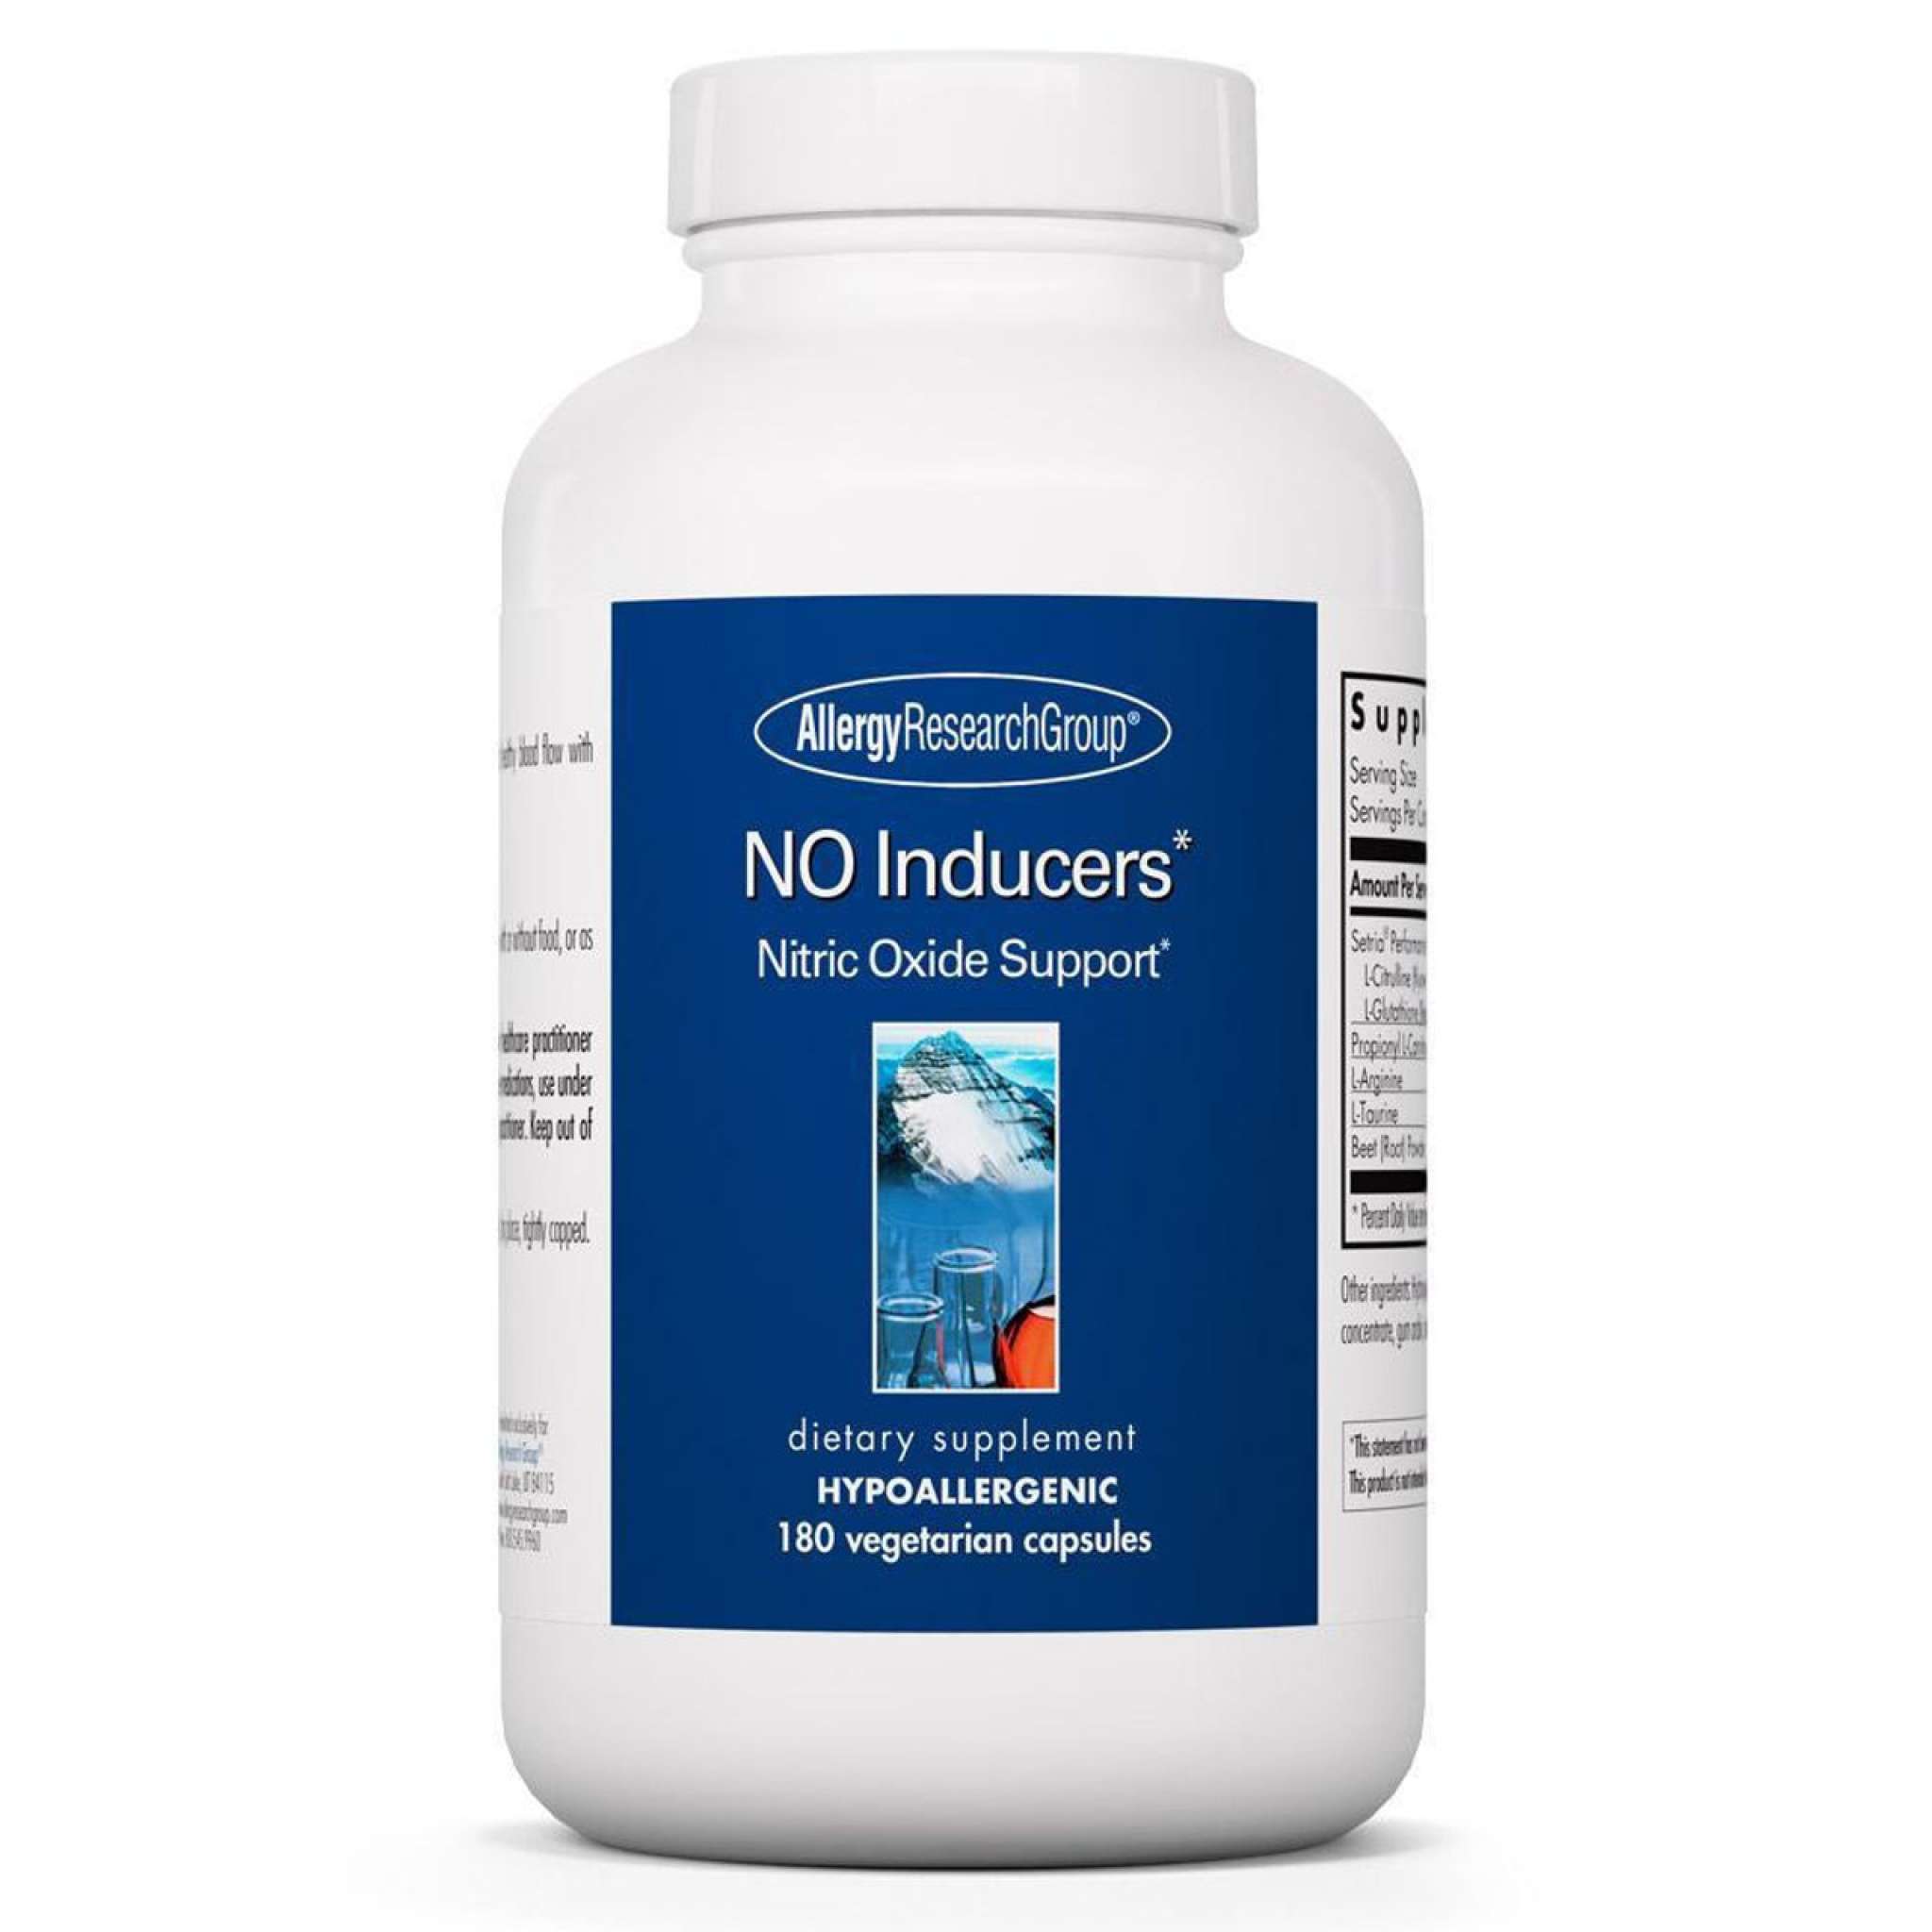 Allergy Research Group - No Inducers Nitric Oxide